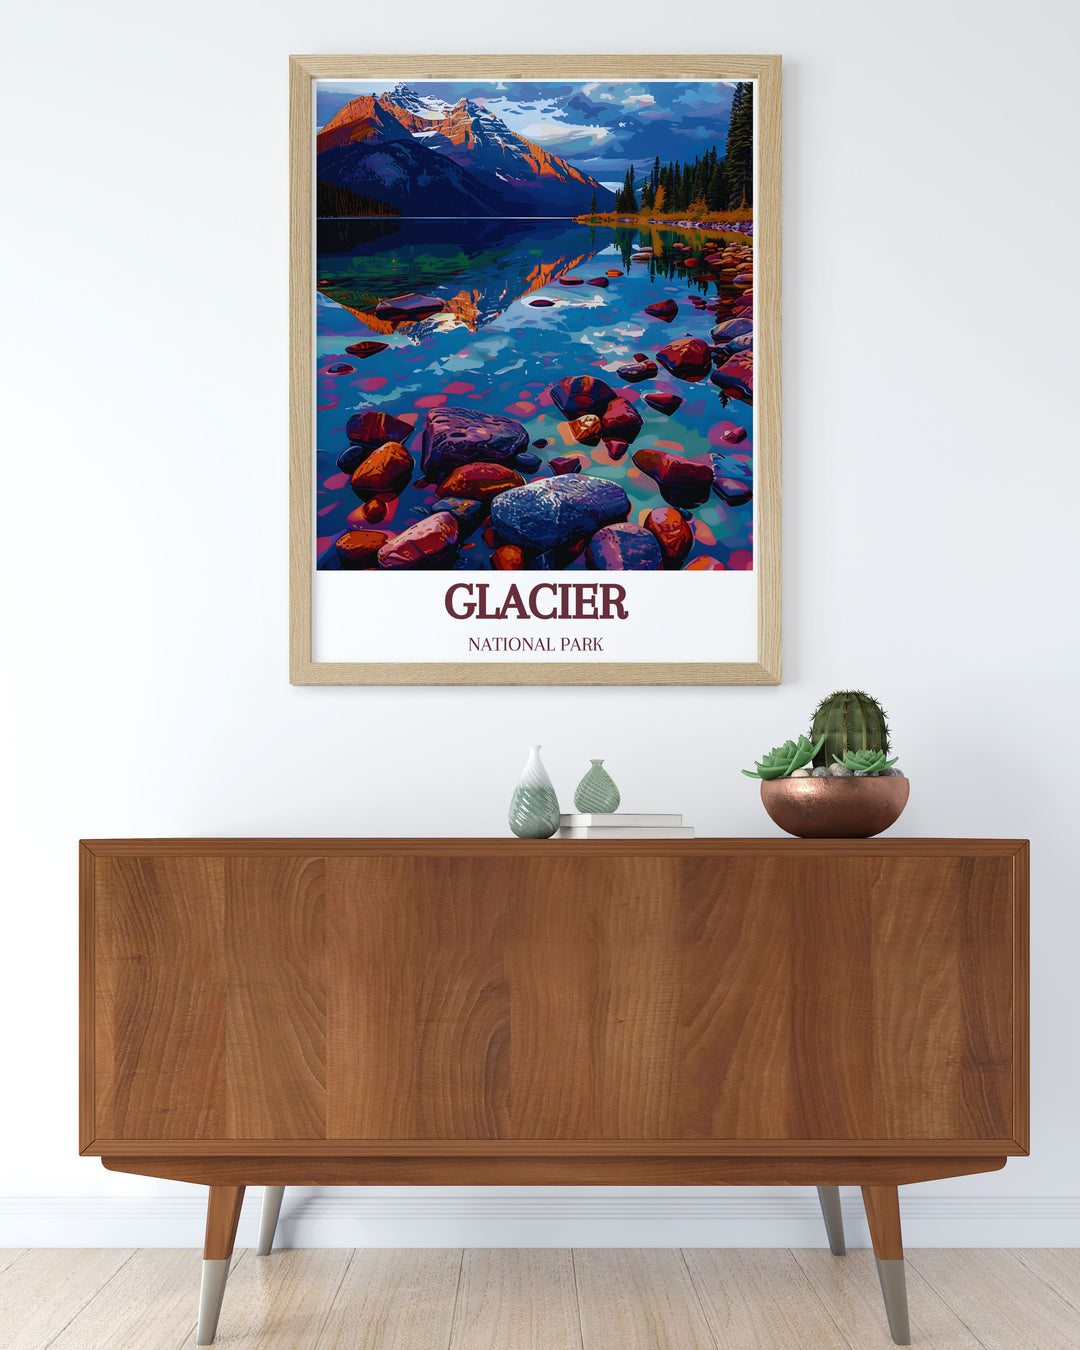 Experience the historical significance of Glacier National Park with this beautifully illustrated poster. Featuring landmarks such as historic lodges and preserved wilderness areas, this piece celebrates the parks rich history and natural heritage.